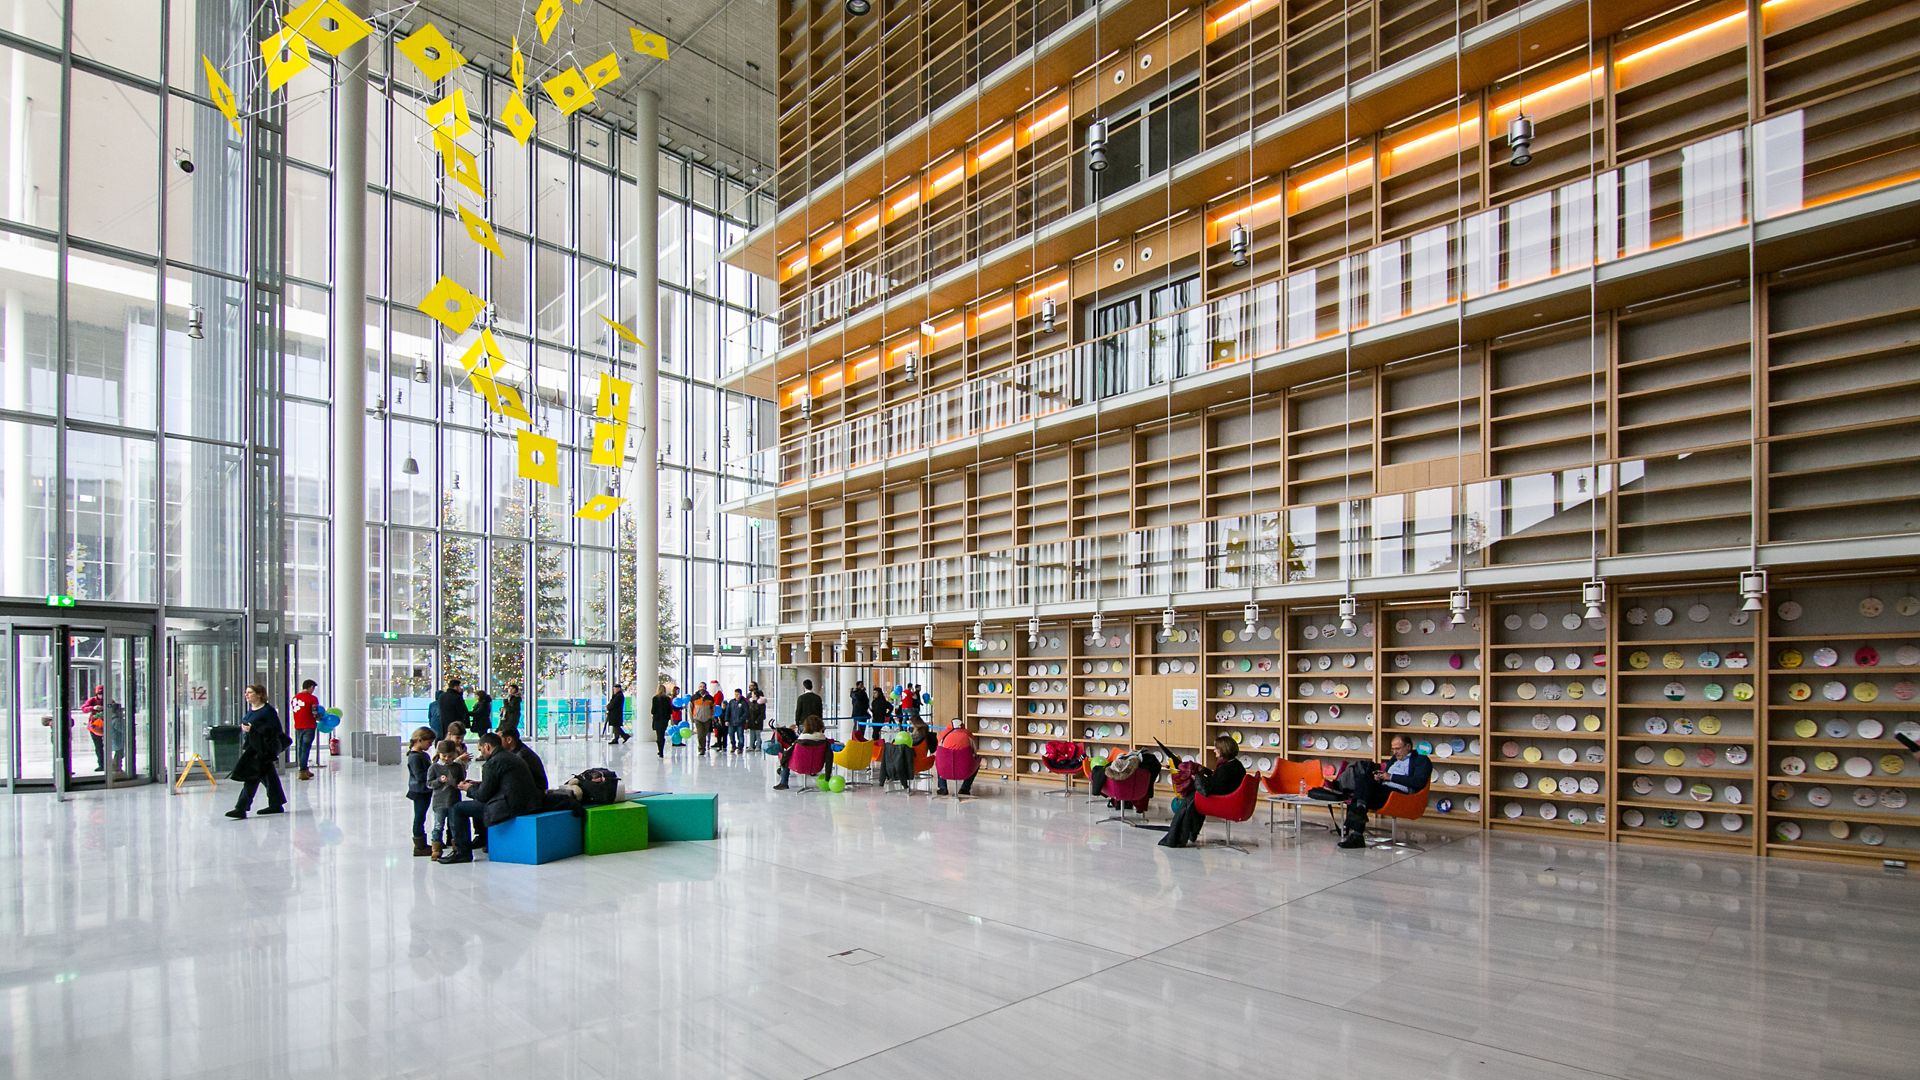 National Library of Greece at the Stavros Niarchos Foundation Cultural Center